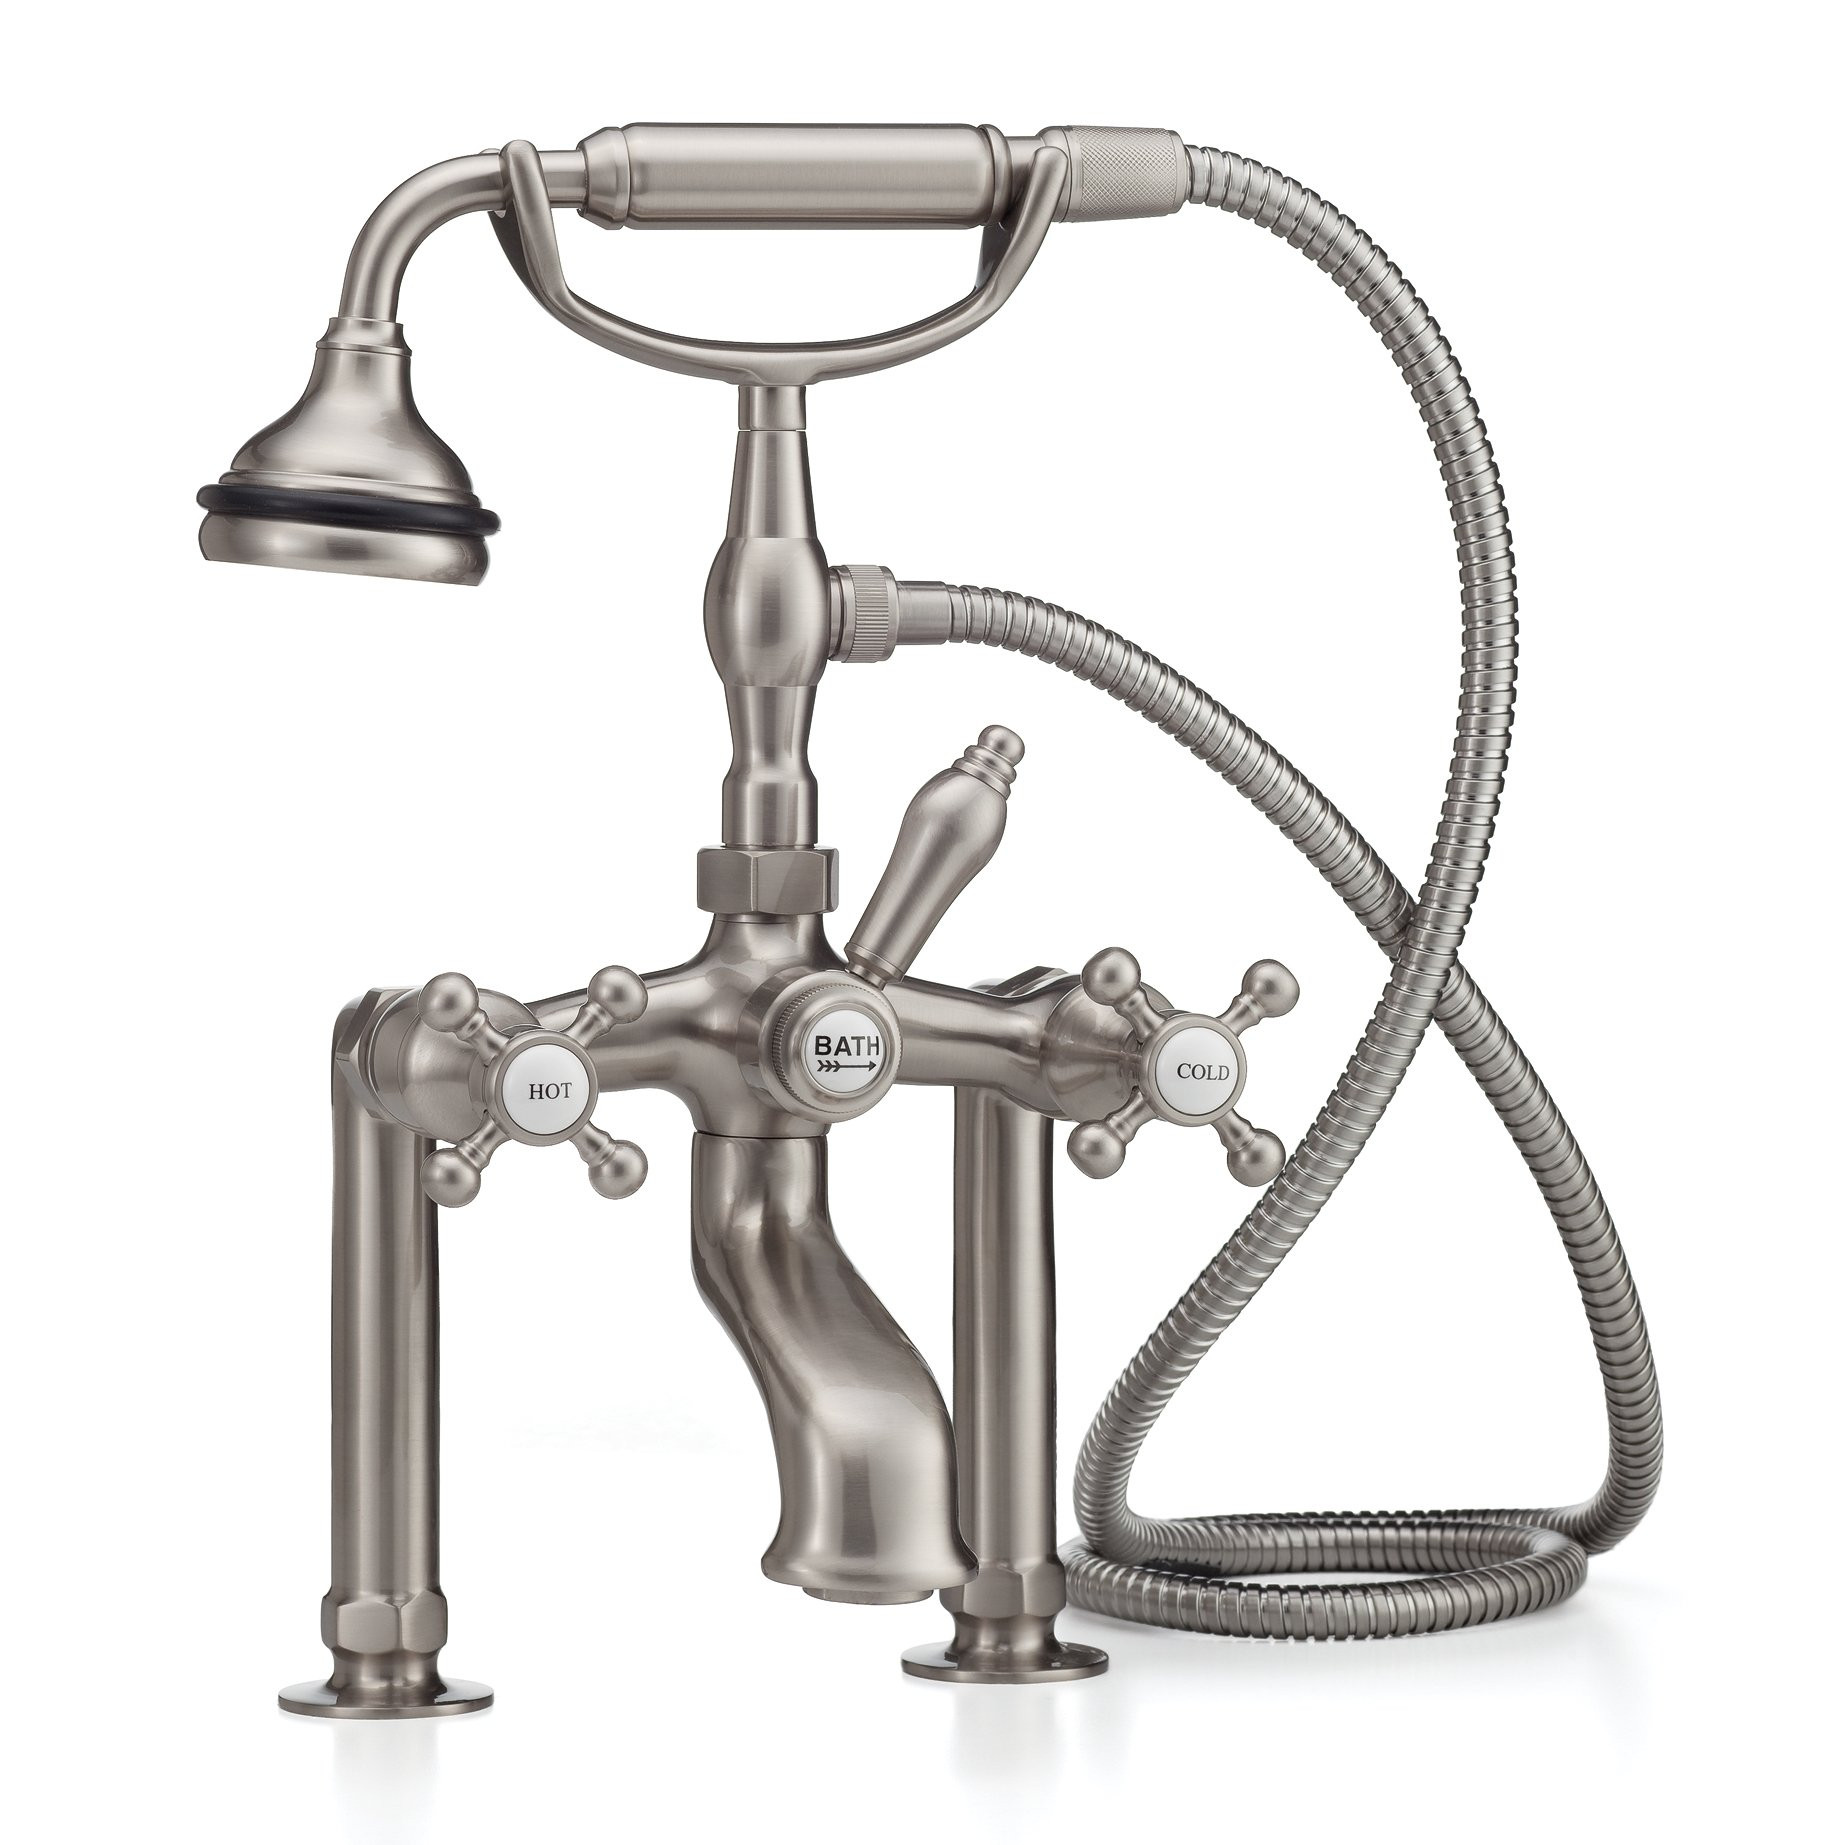 Cheviot 5121 Cross Handles - Shown with rim mount - extra Tall